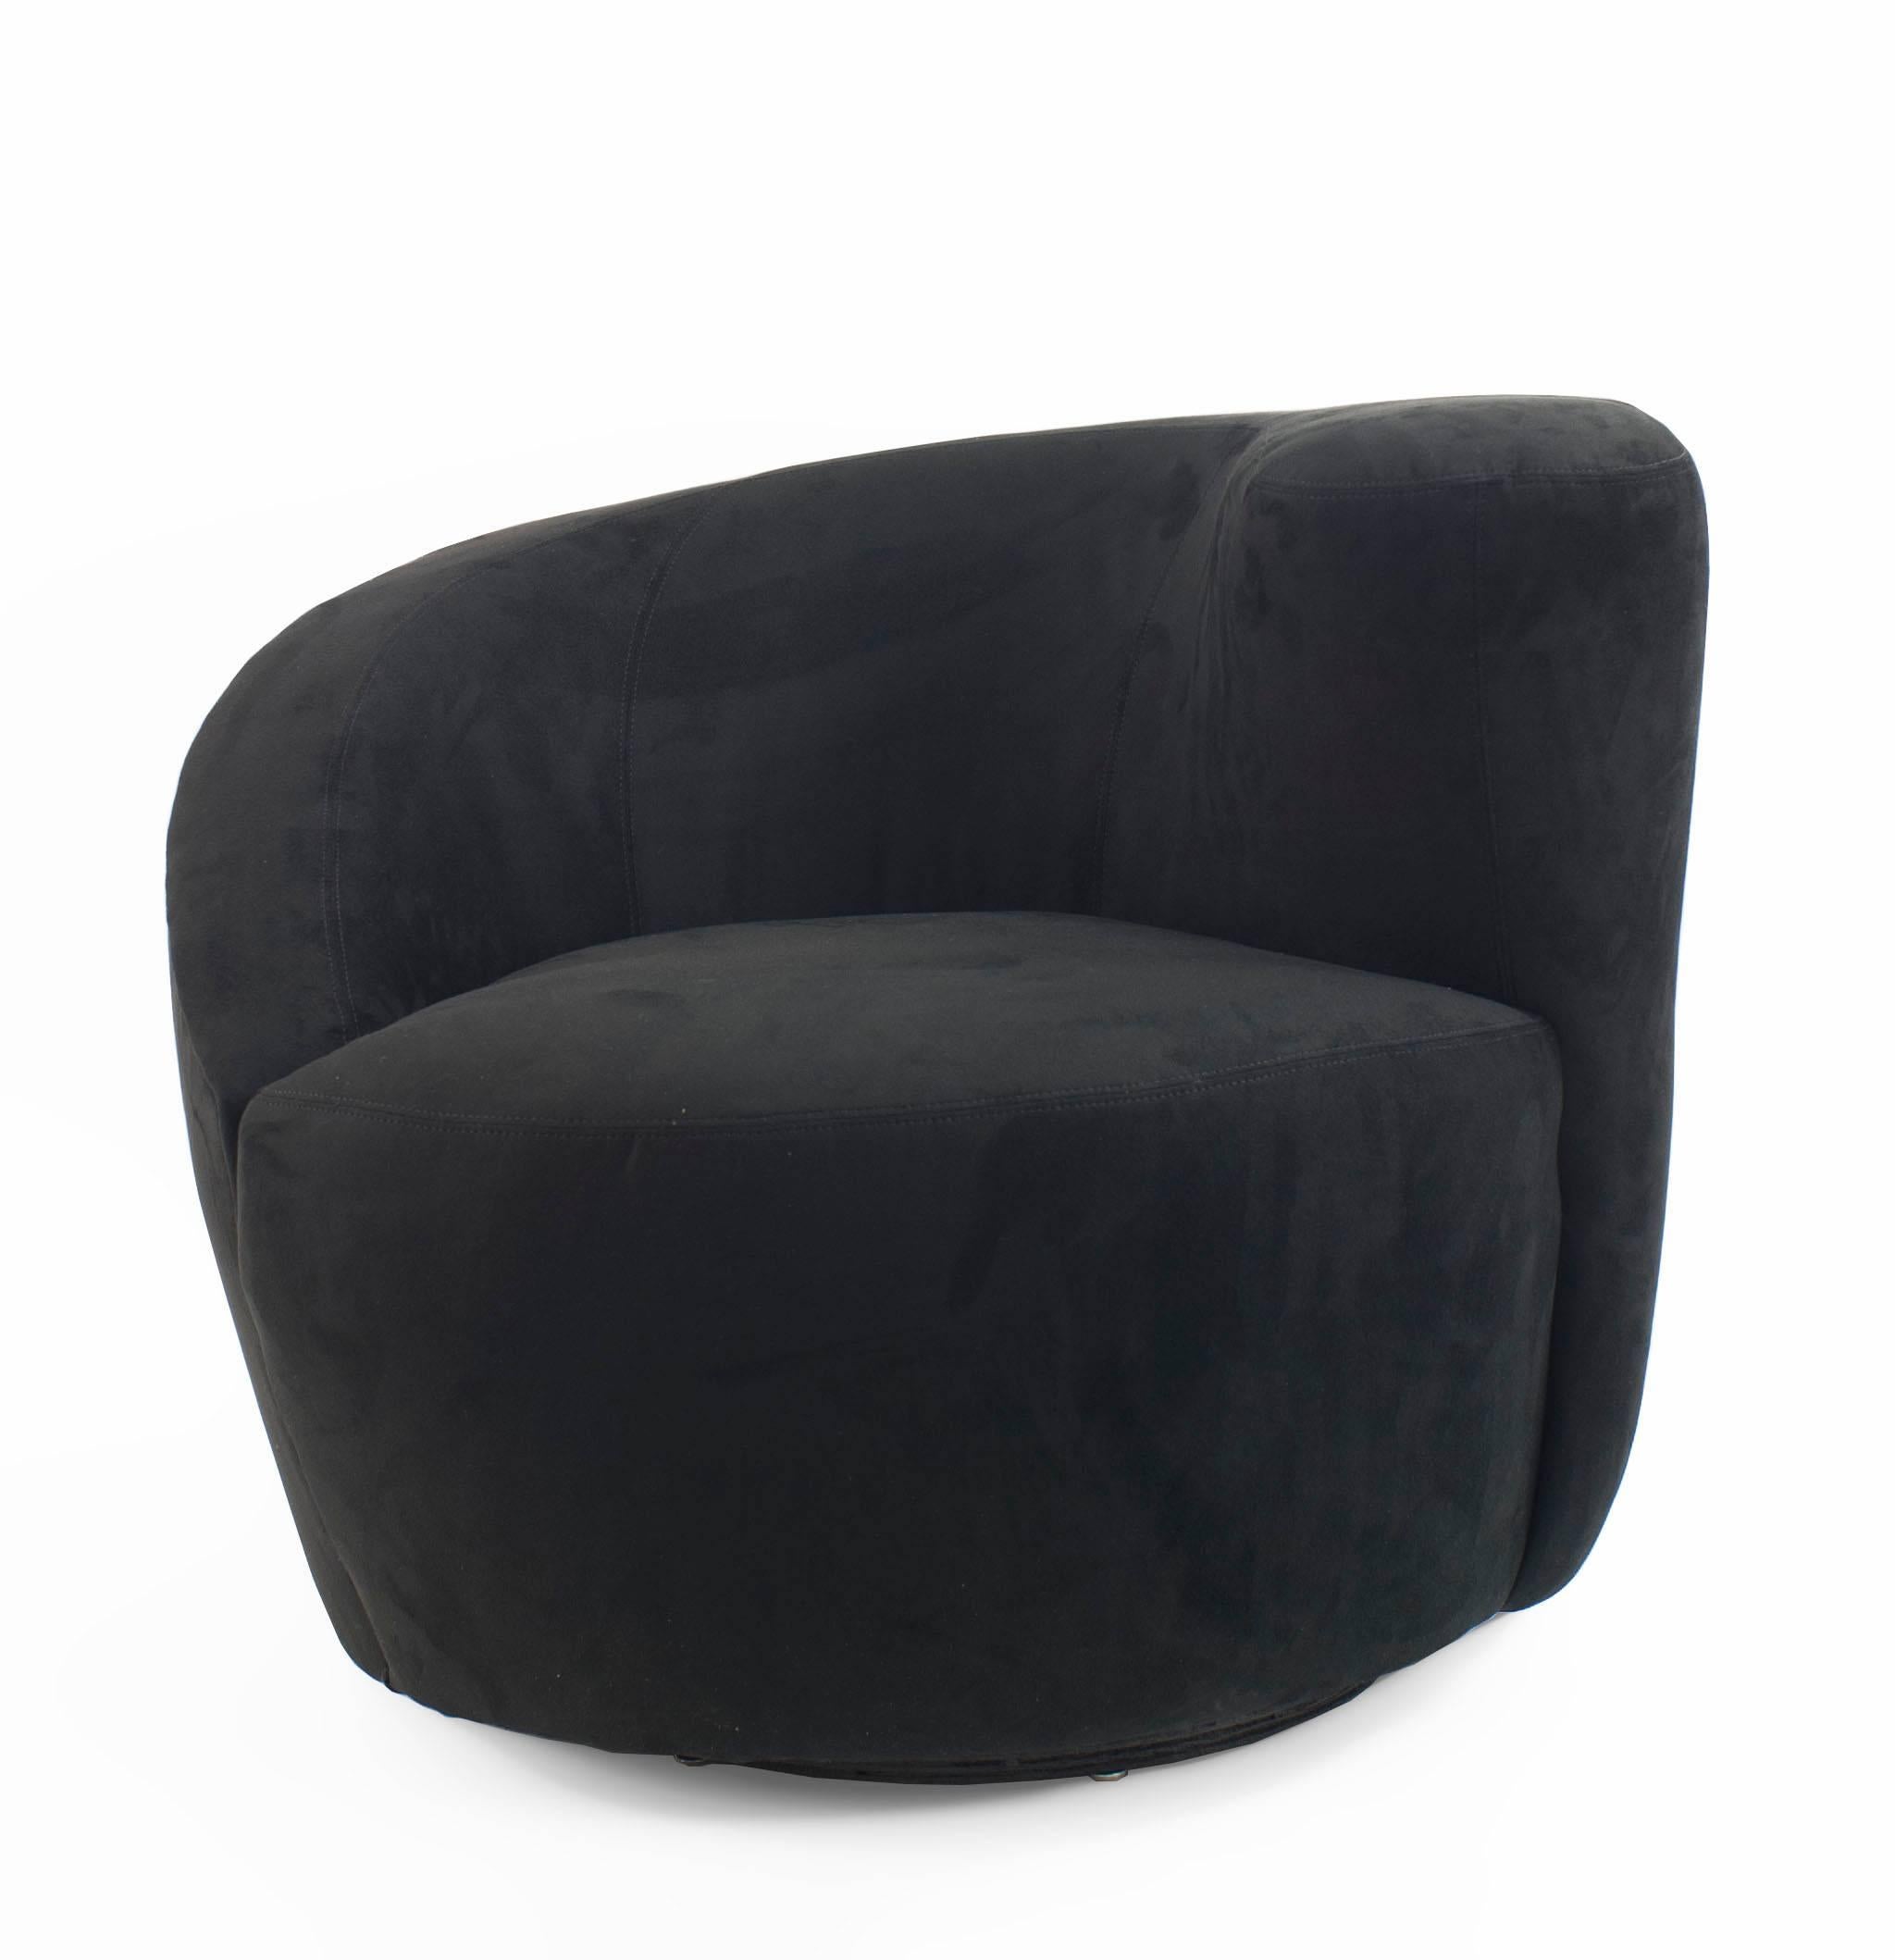 (Two) contemporary black suede corkscrew-shaped swivel armchairs (one left hand arm; one right hand arm) (designed by Vladimir Kagan for Directional) (priced each).

 